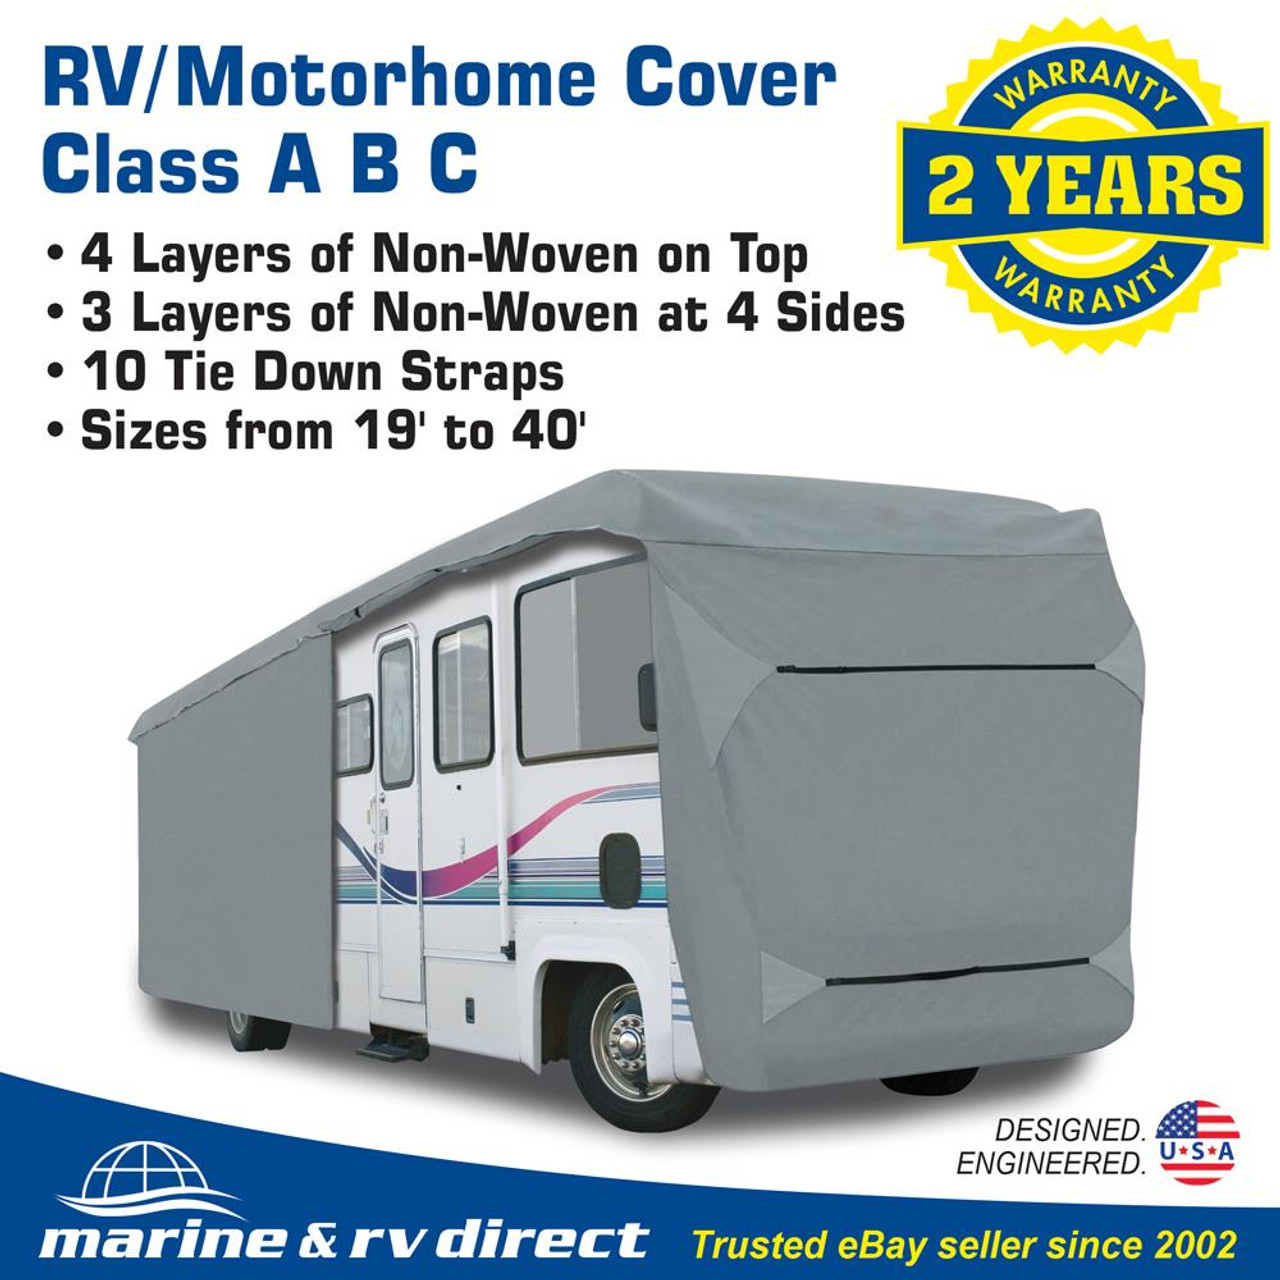 Waterproof RV Cover Motorhome Camper Travel Trailer Fit 20'-24' Class A B C  - Marine and RV Direct